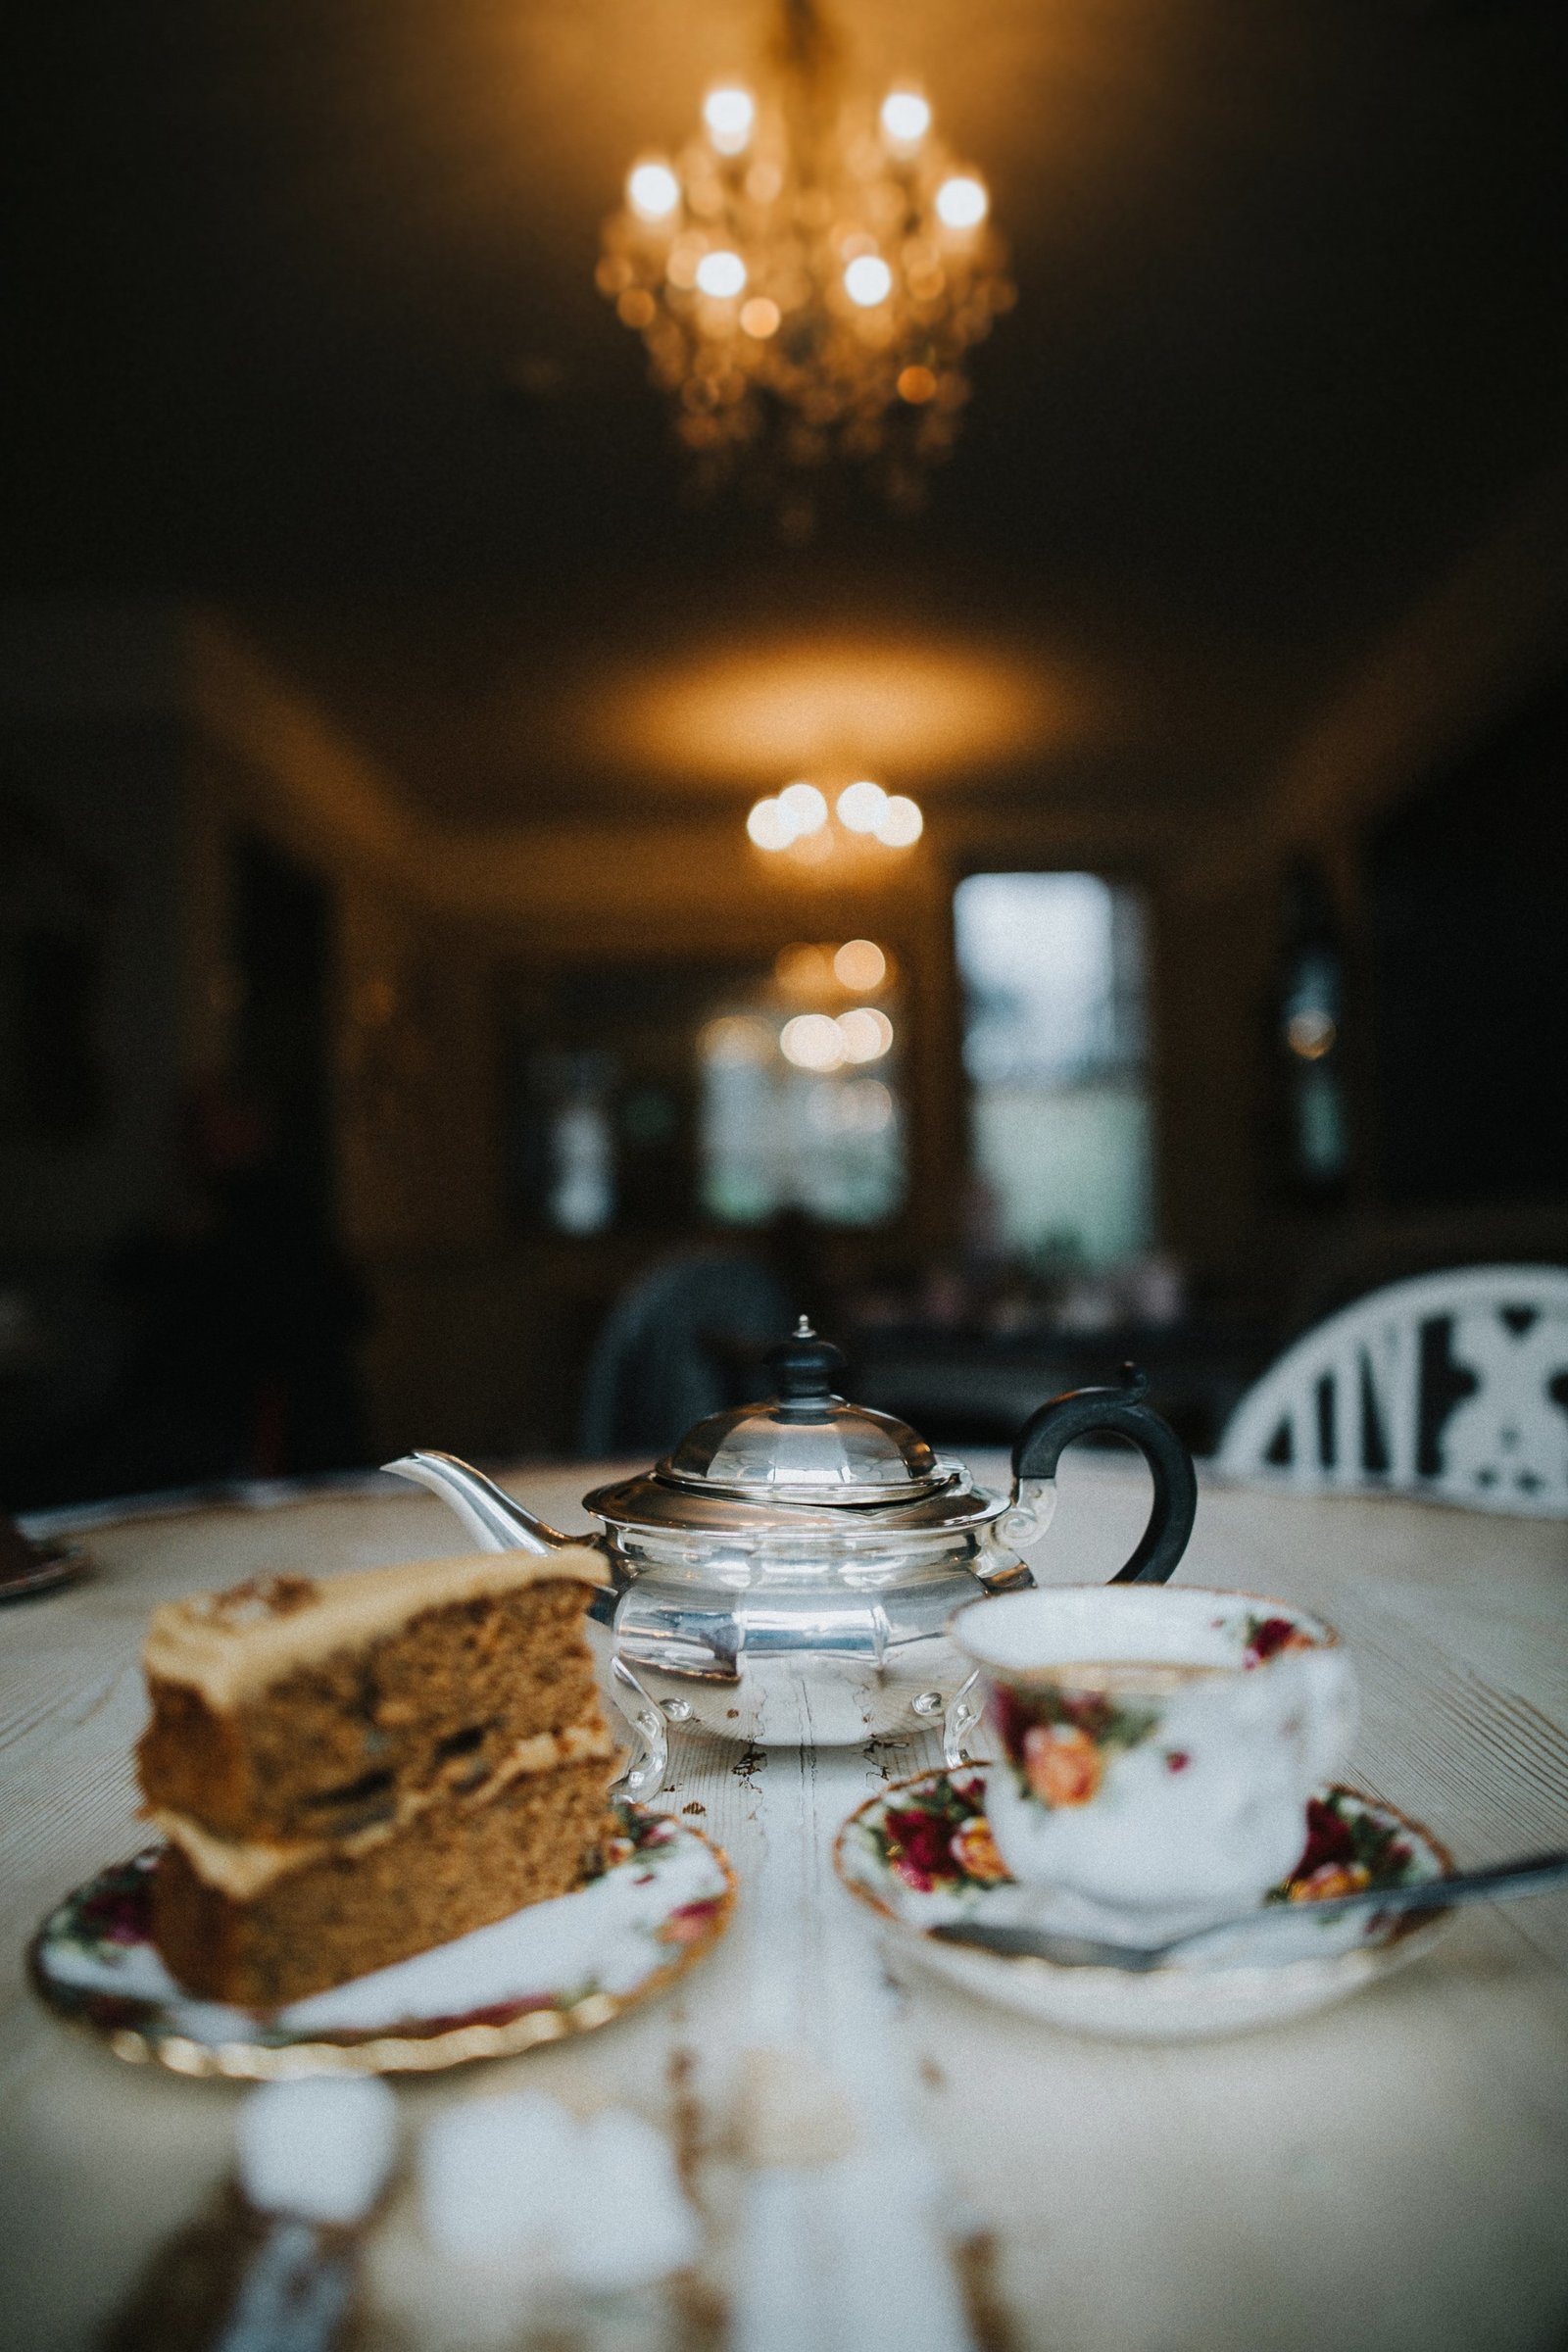 Teapot, teacup and cake set out on table at Baldry's Tearoom in Grasmere Village, The Lake District